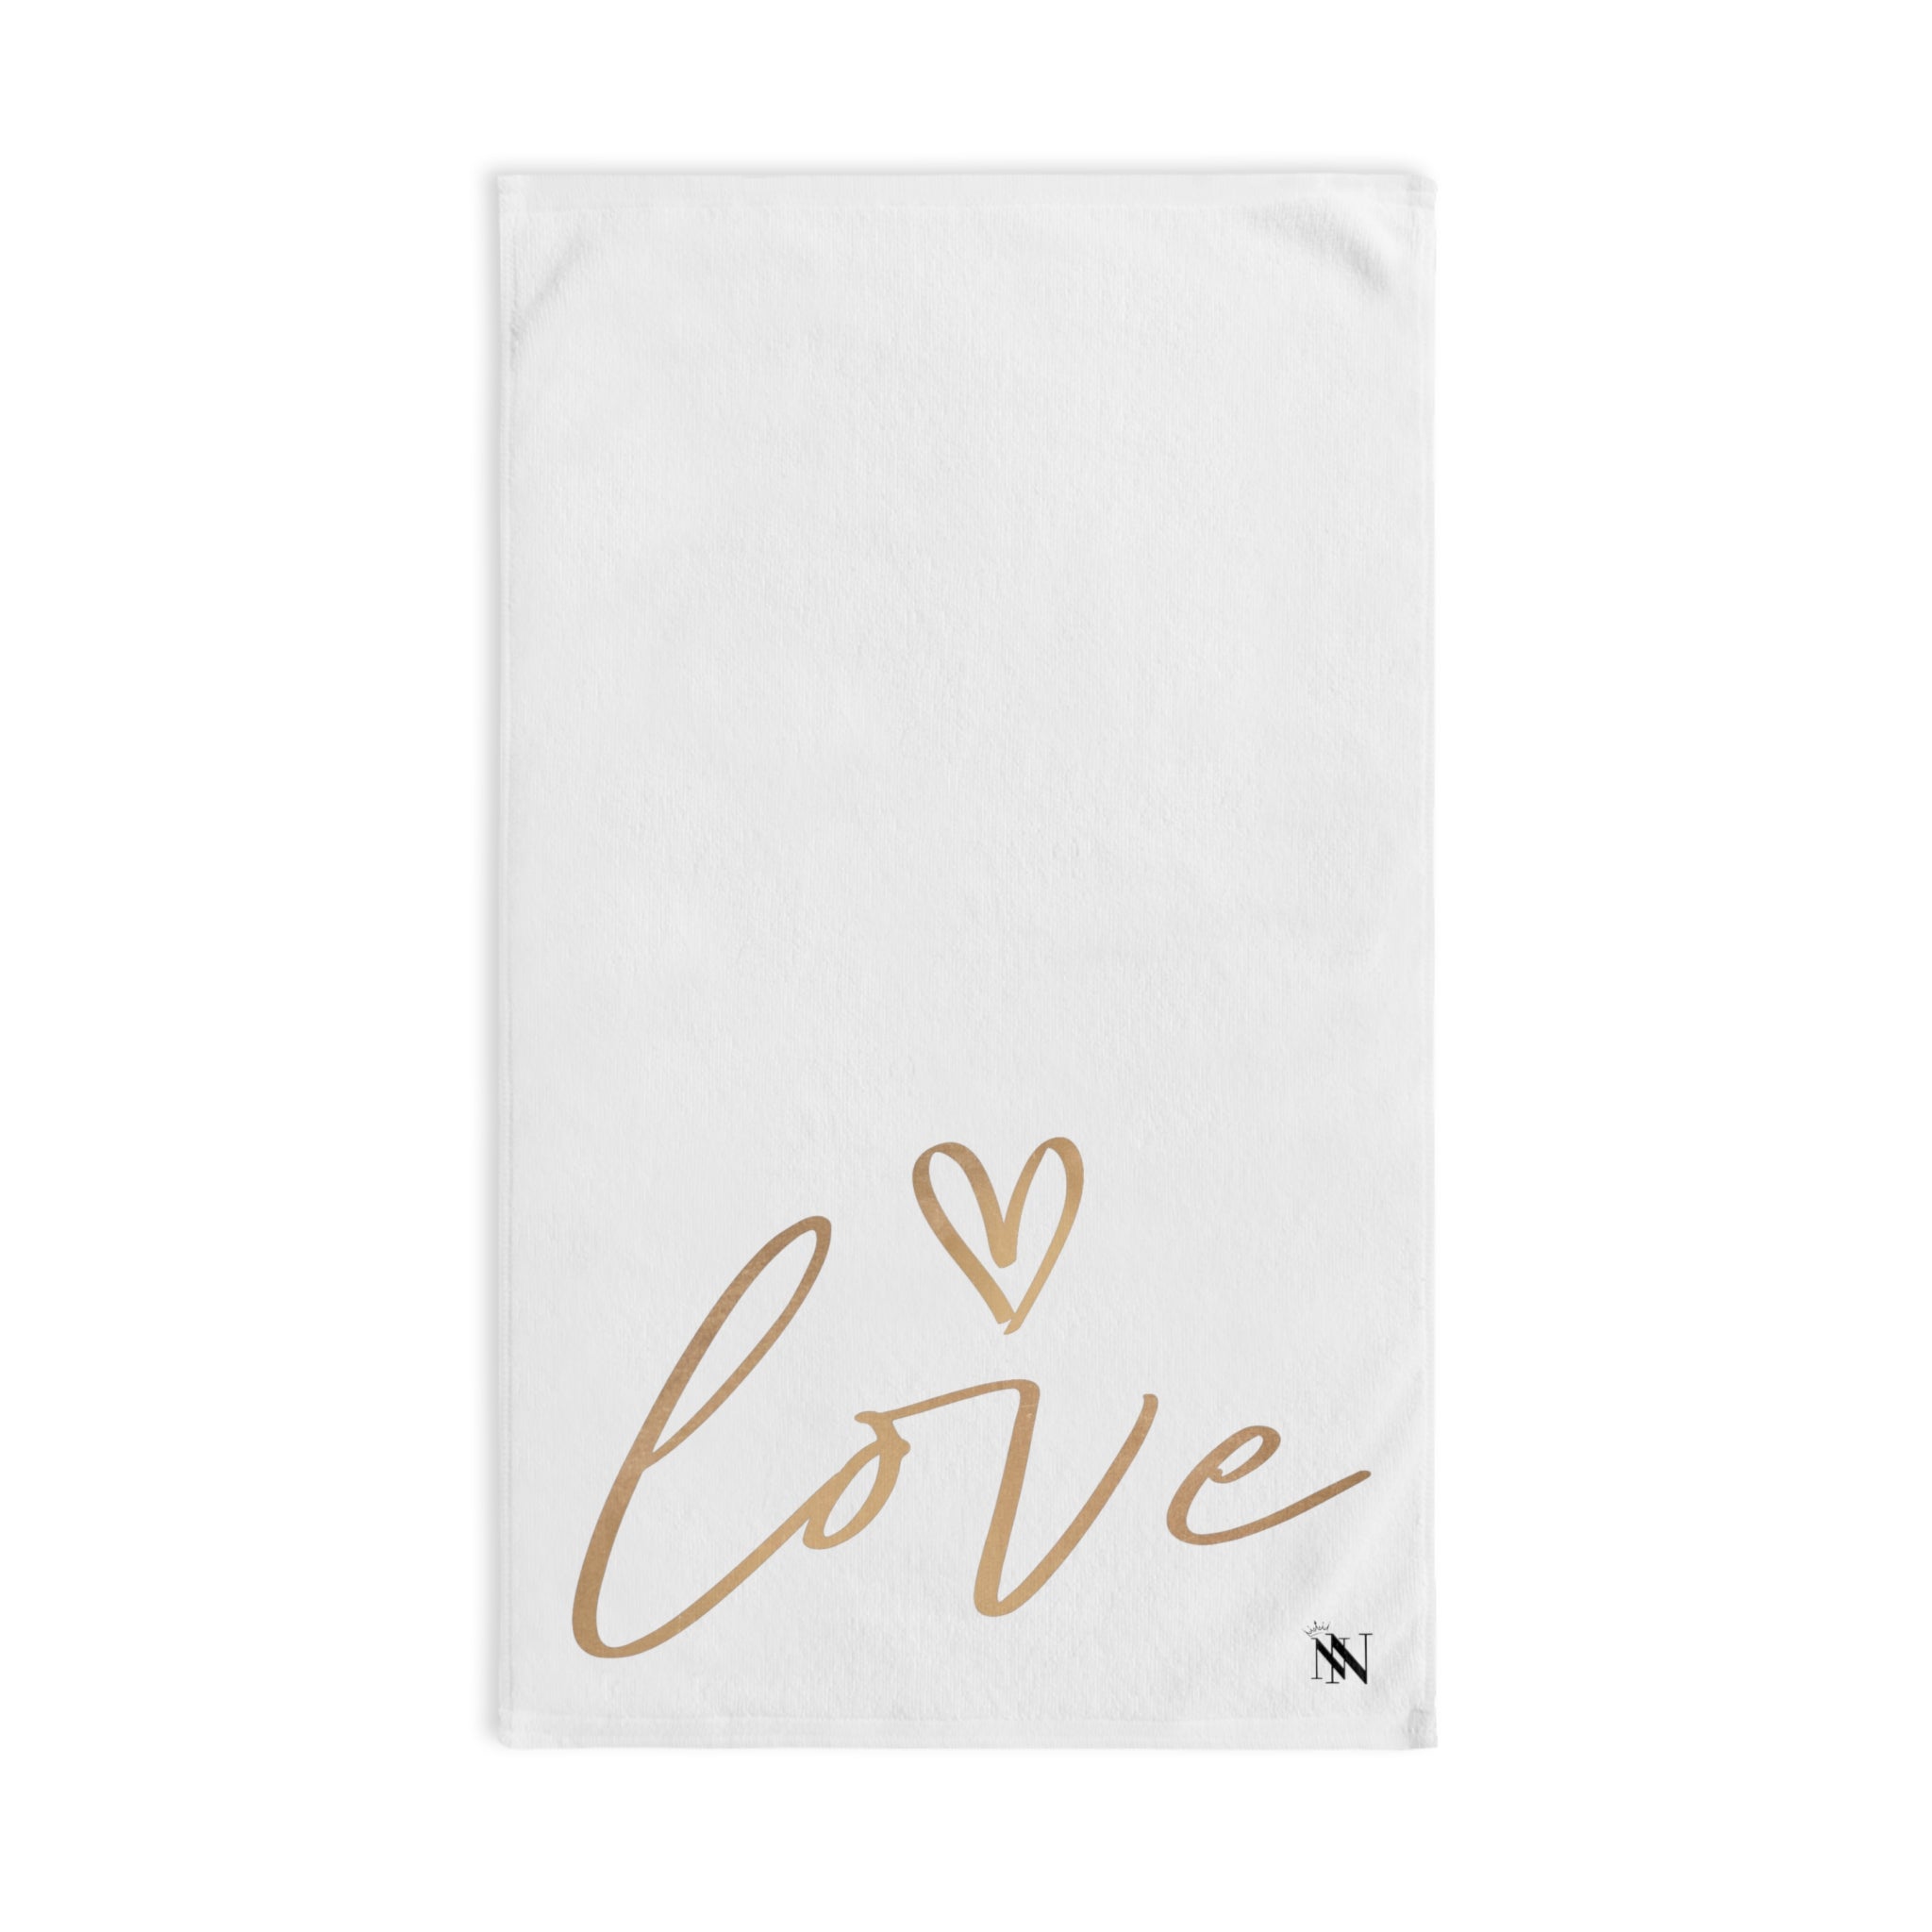 Gold Love Heart White | Funny Gifts for Men - Gifts for Him - Birthday Gifts for Men, Him, Her, Husband, Boyfriend, Girlfriend, New Couple Gifts, Fathers & Valentines Day Gifts, Christmas Gifts NECTAR NAPKINS